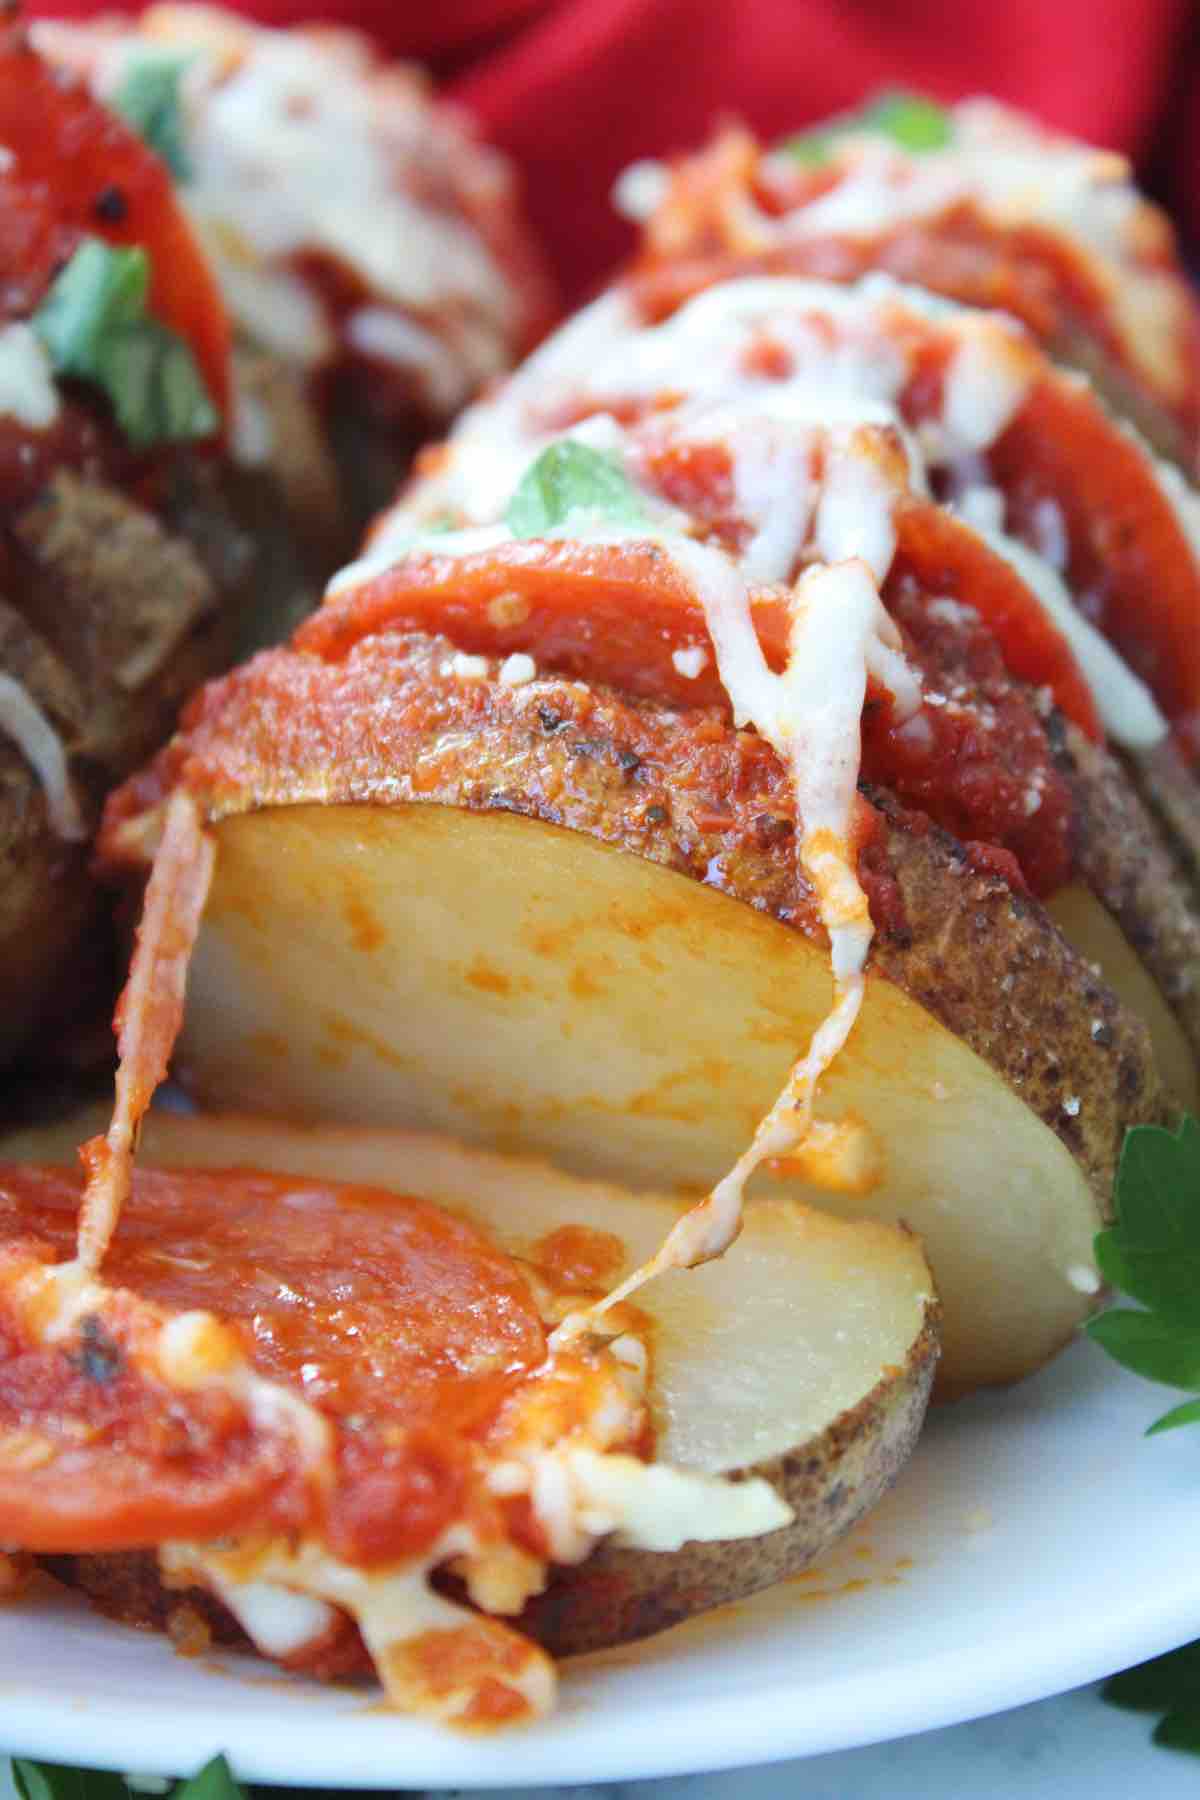 Baked potato with pizza toppings.